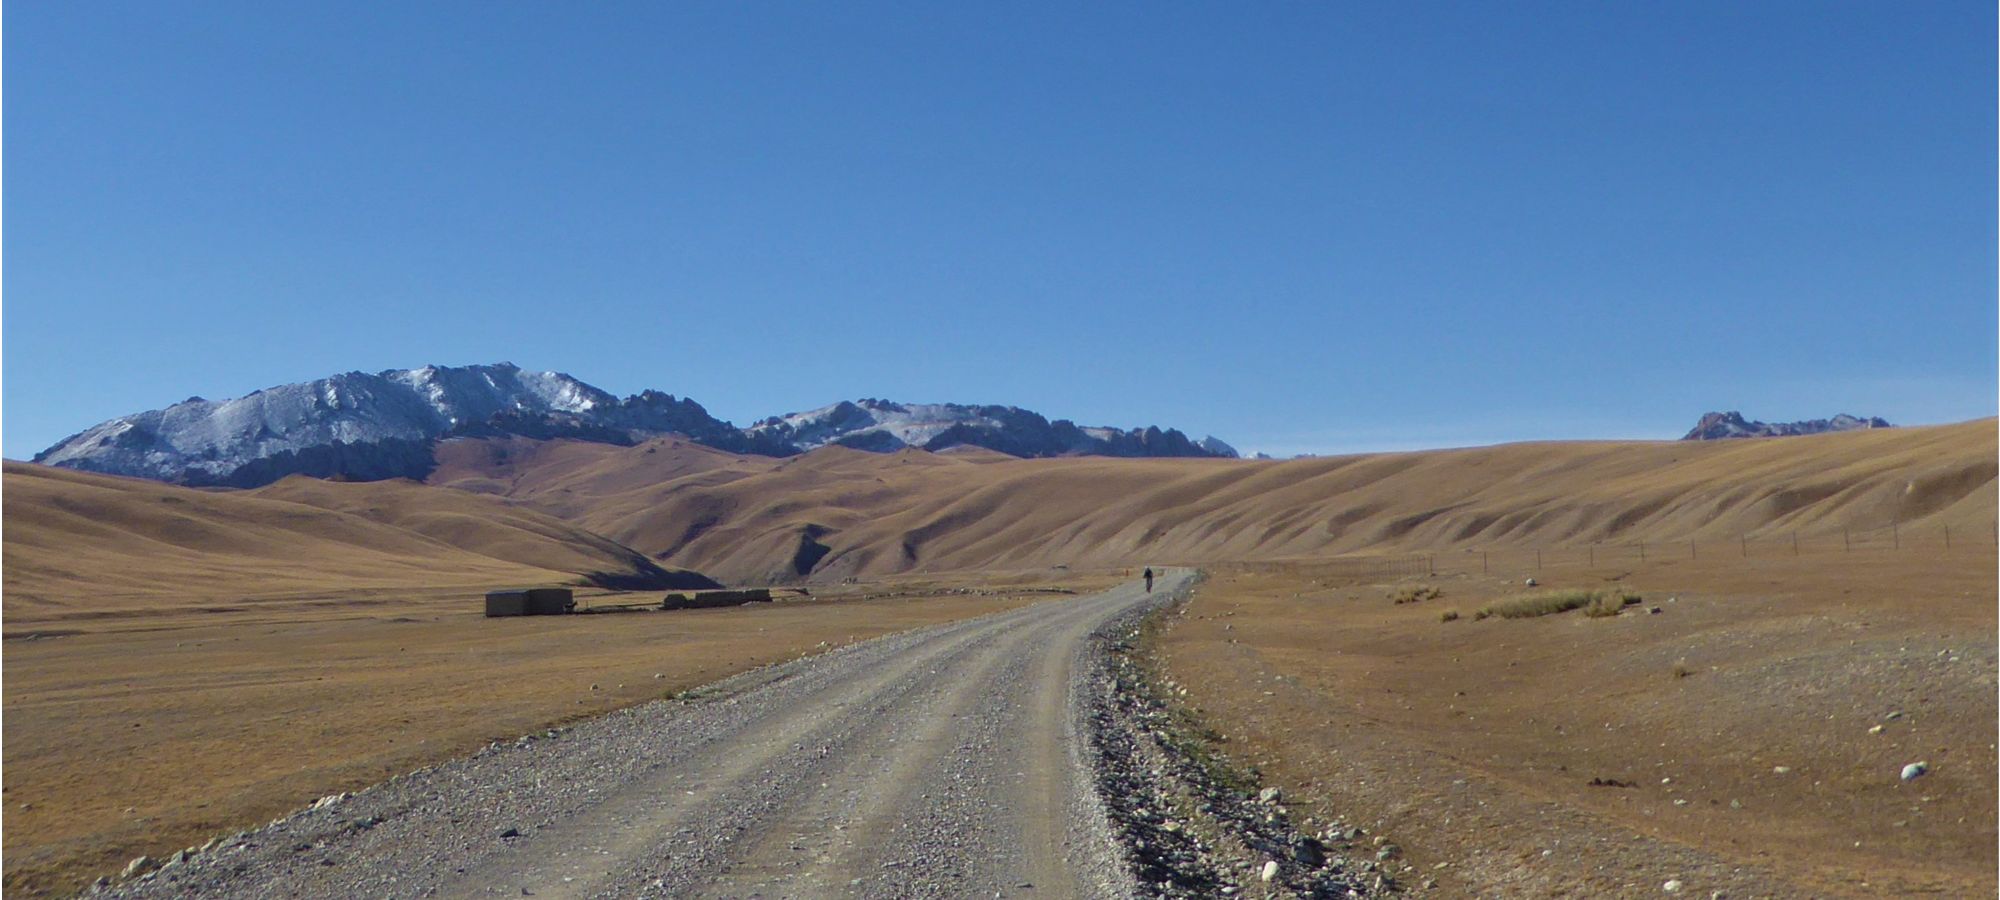 Photos from our Karakoram Highway Cycling Holiday